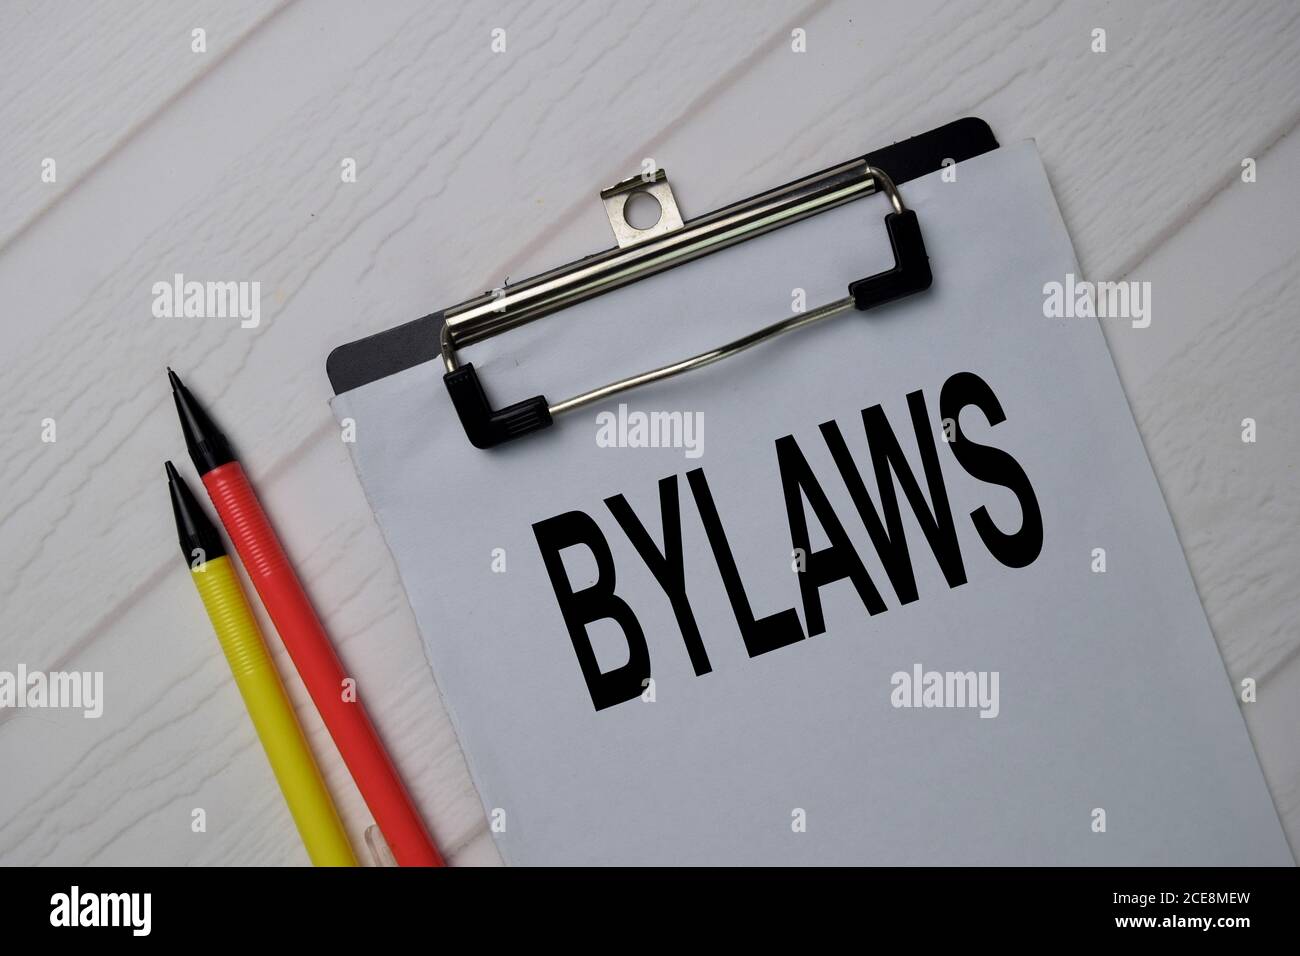 Bylaws write on a paperwork isolated on wooden table. Stock Photo